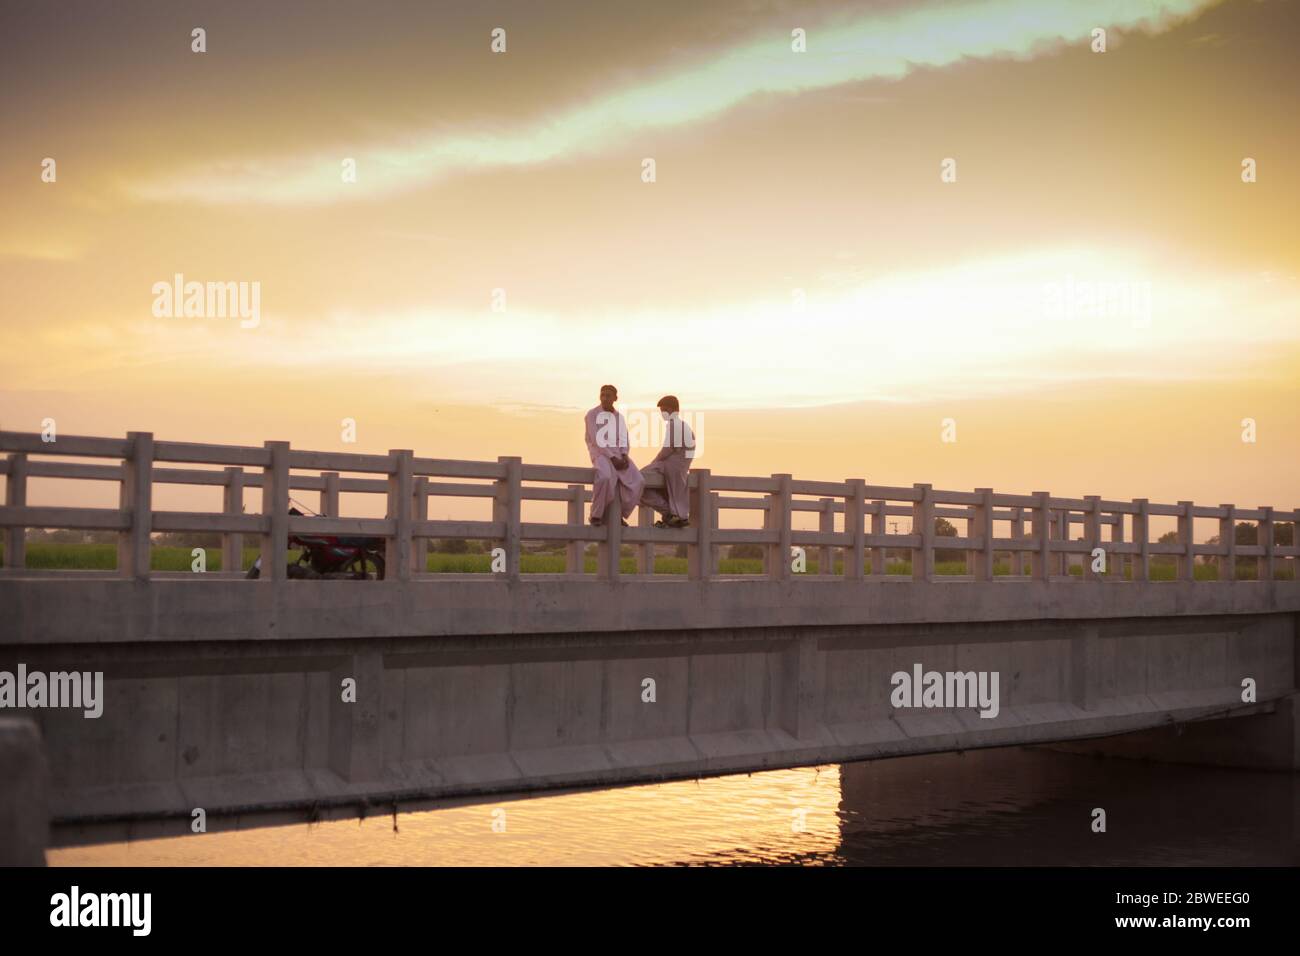 Two Villagers Are Sitting On A Bridge During Sunset, In Moro, Sindh, Pakistan 26/08/2017 Stock Photo